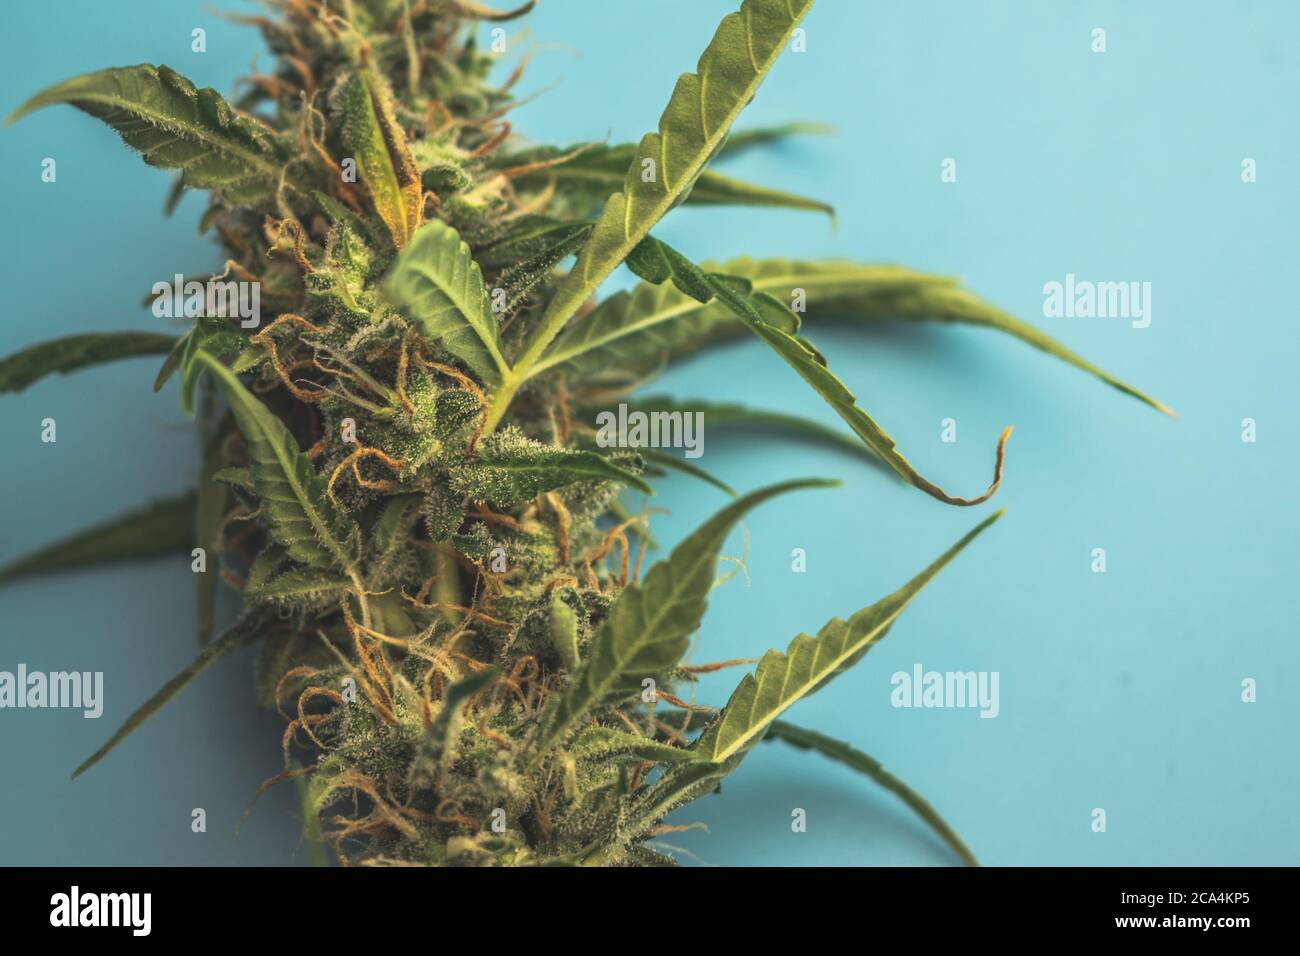 Cannabis plant with THC and CBD close-up on blue background. Marijuana medical use in healthcare. Legal Weed industry Stock Photo